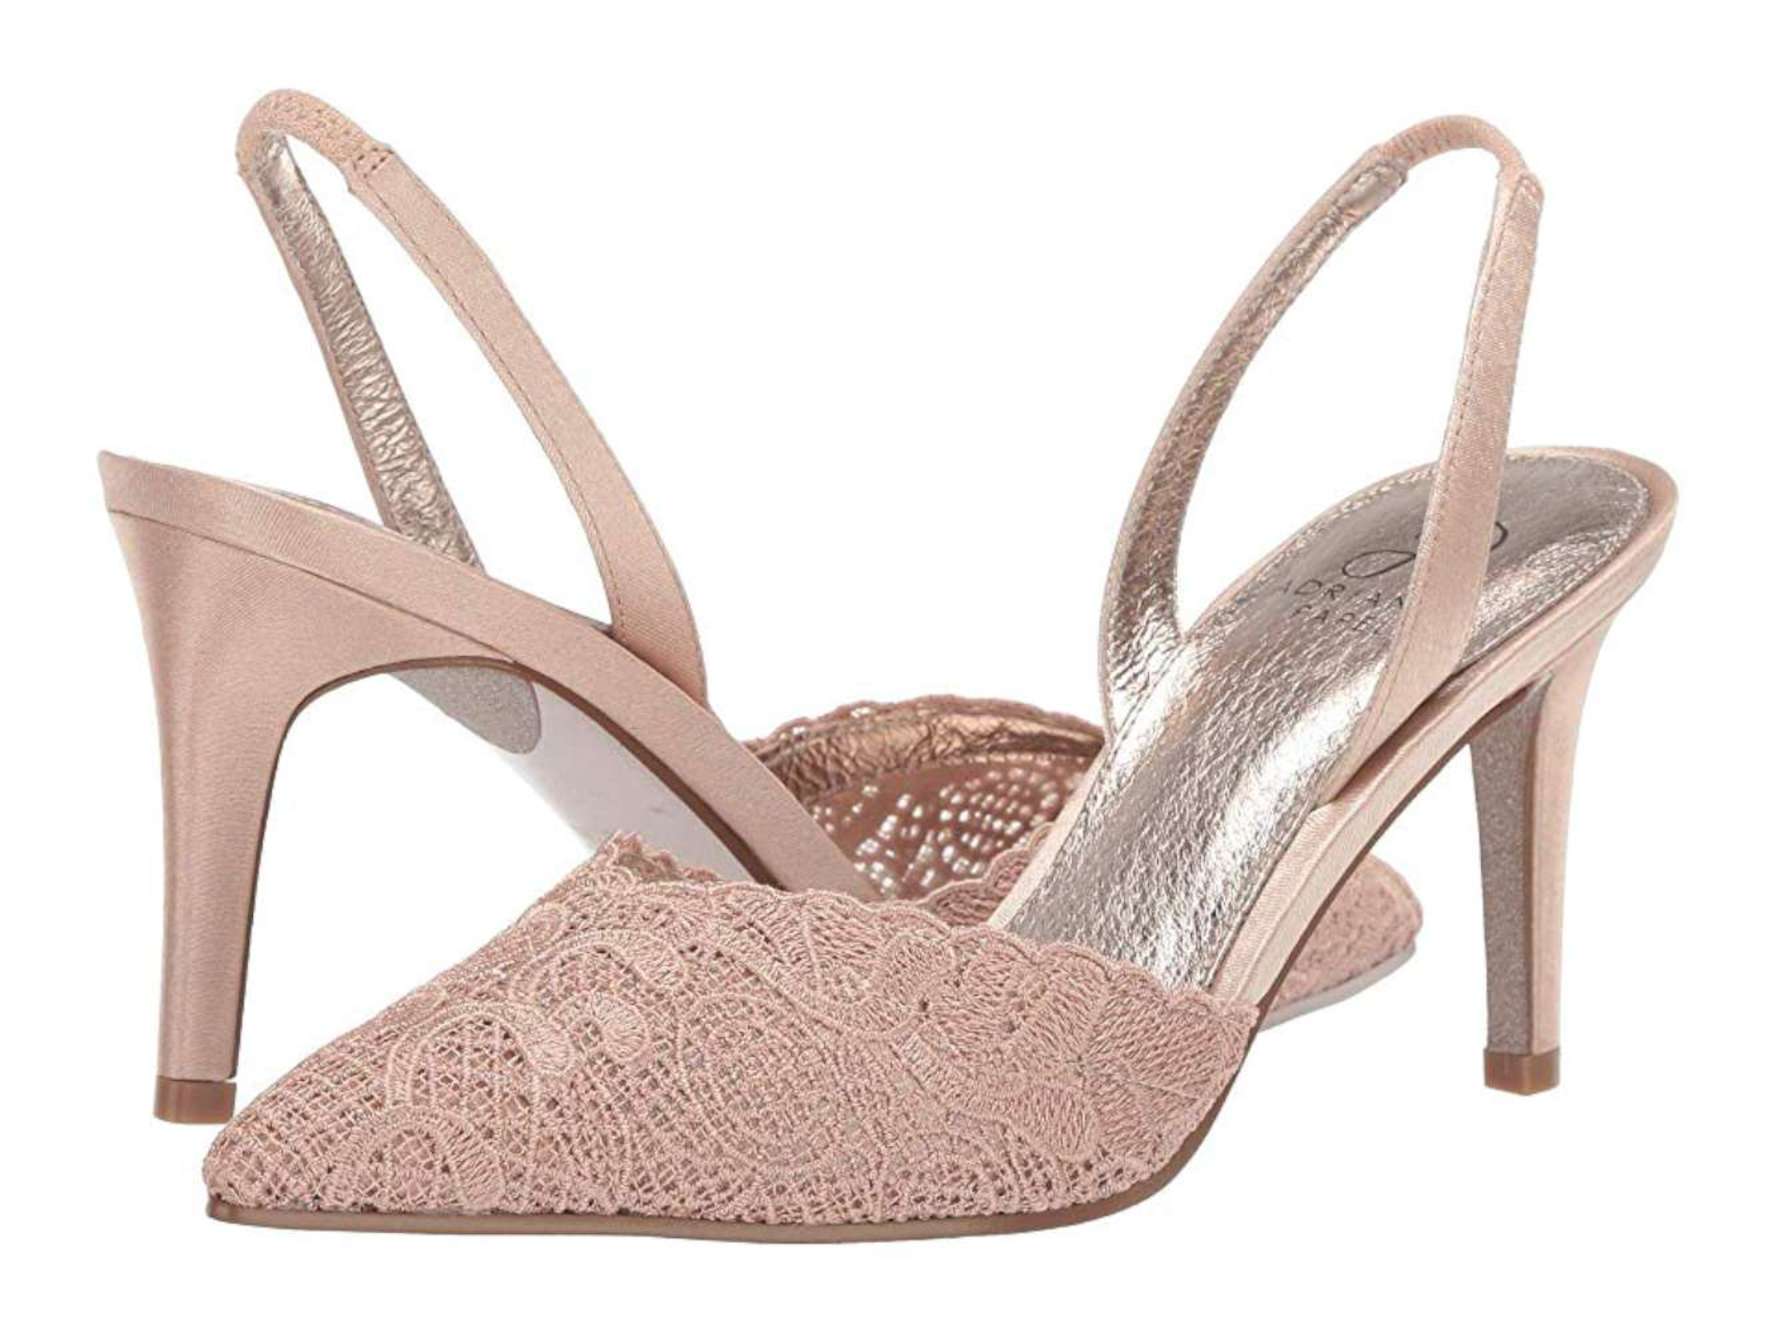 Adrianna Papell Women's Shoes Hallie Fabric Pointed Toe Special, Blush, Size 8.5 - image 1 of 3